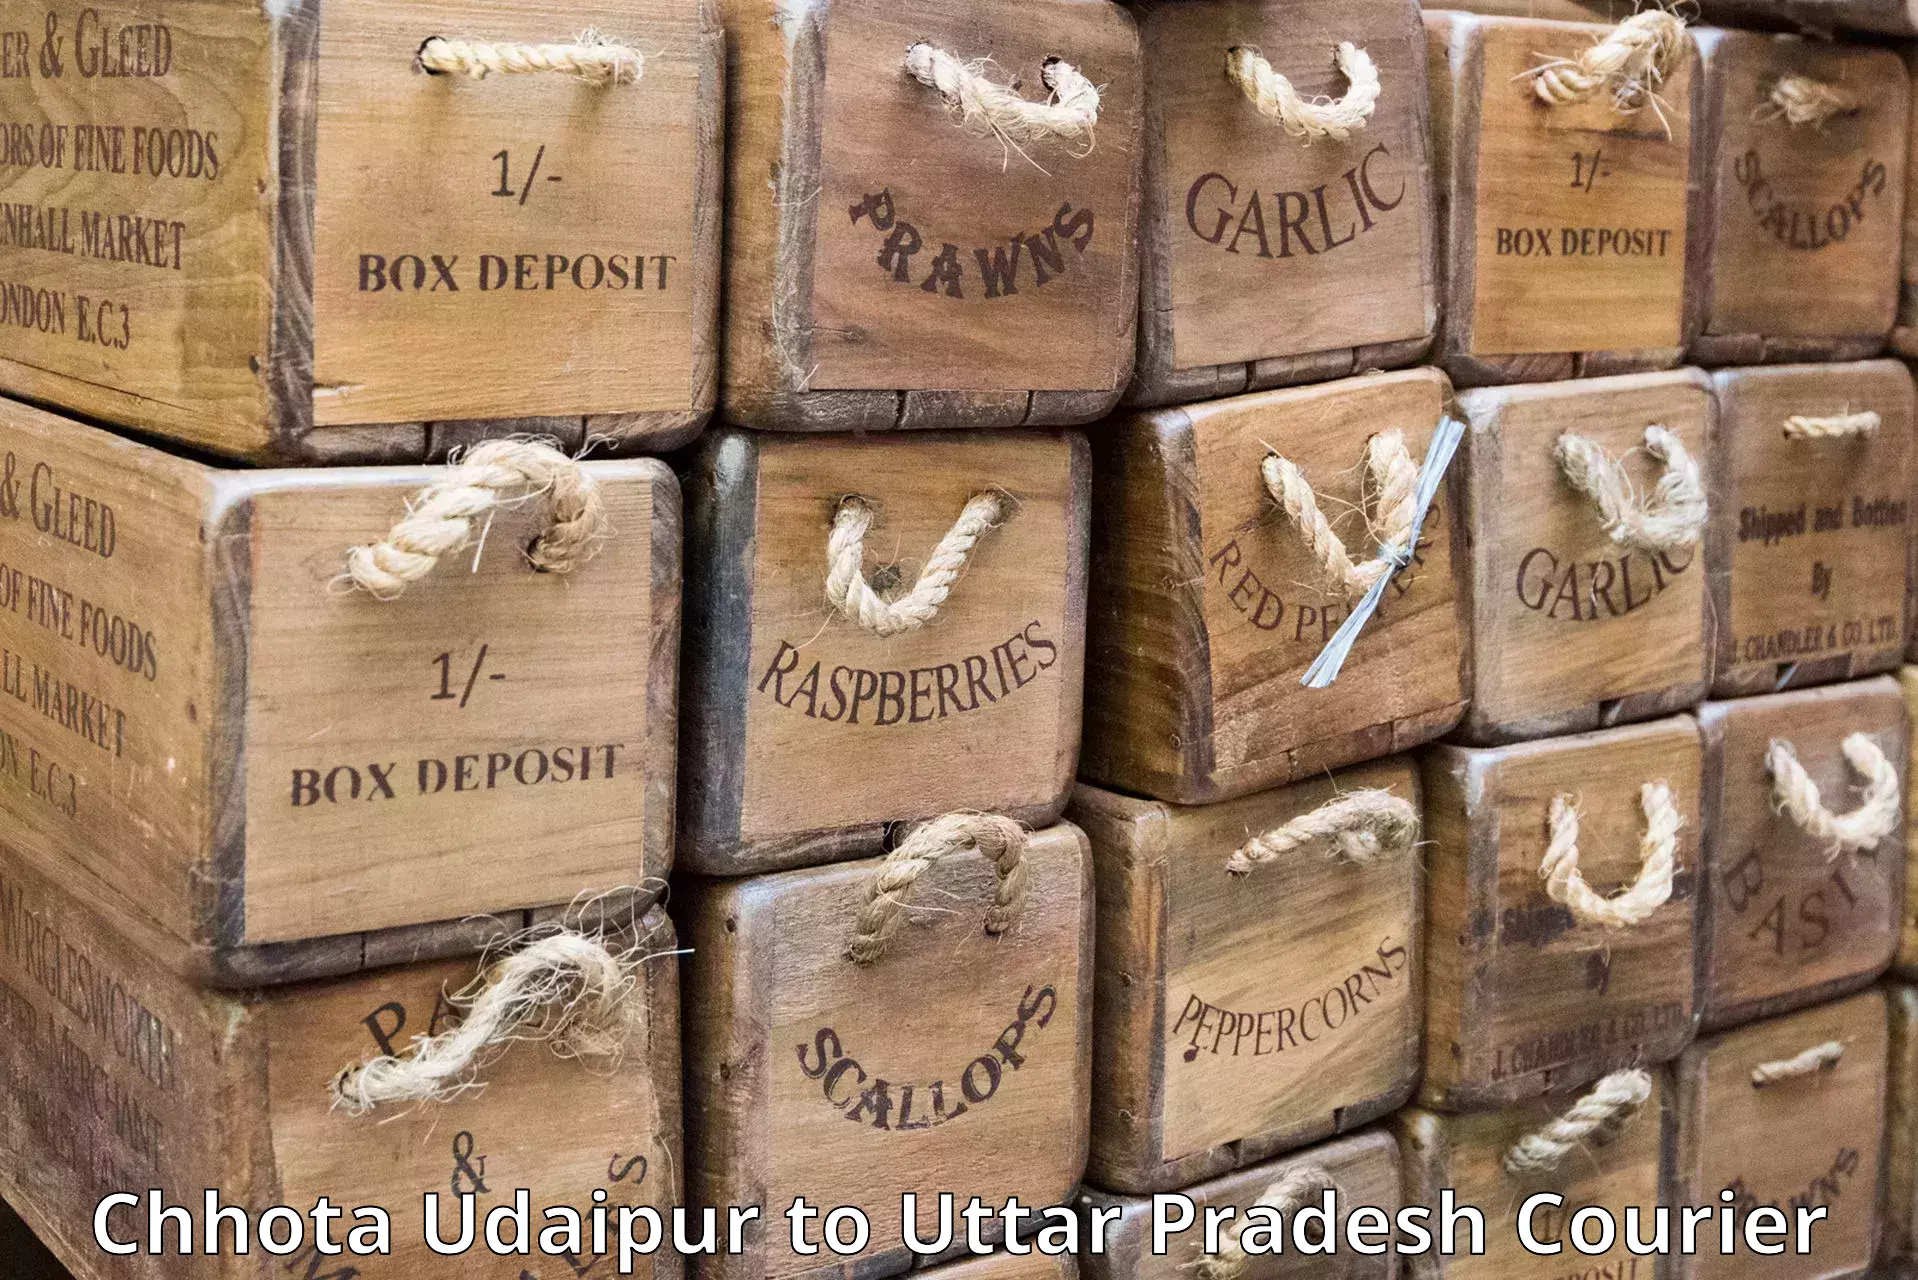 Easy access courier services Chhota Udaipur to Malihabad